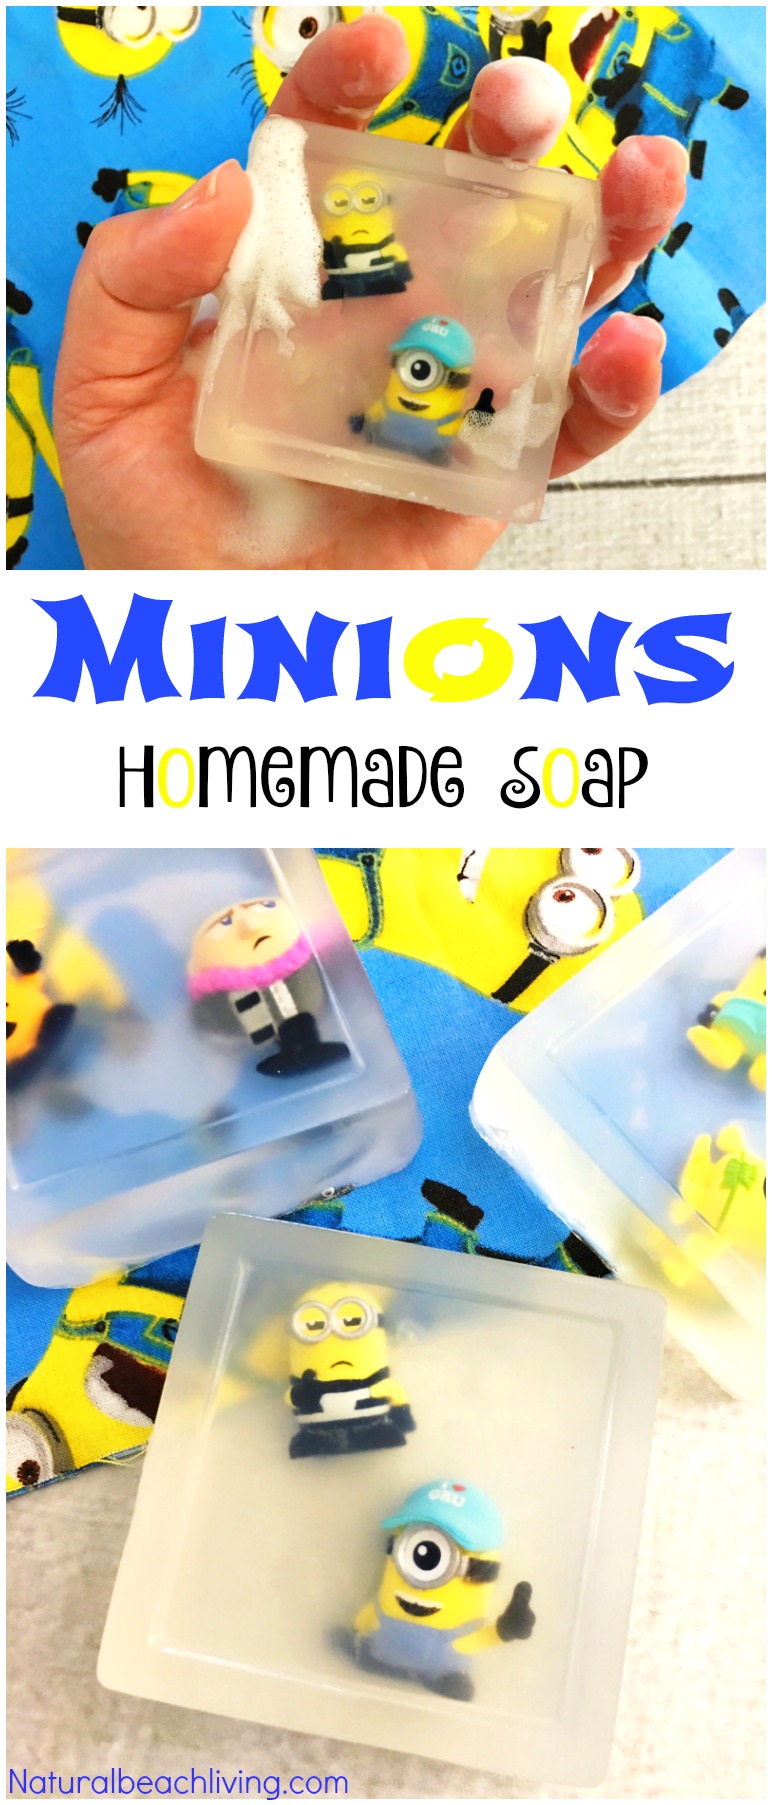 How to Make Homemade Soap Minions Style, Despicable Me Minions, Easy Homemade Soap Recipe, Minions Soap, DIY Soap, Cutest Soap Ever, Kids Love it